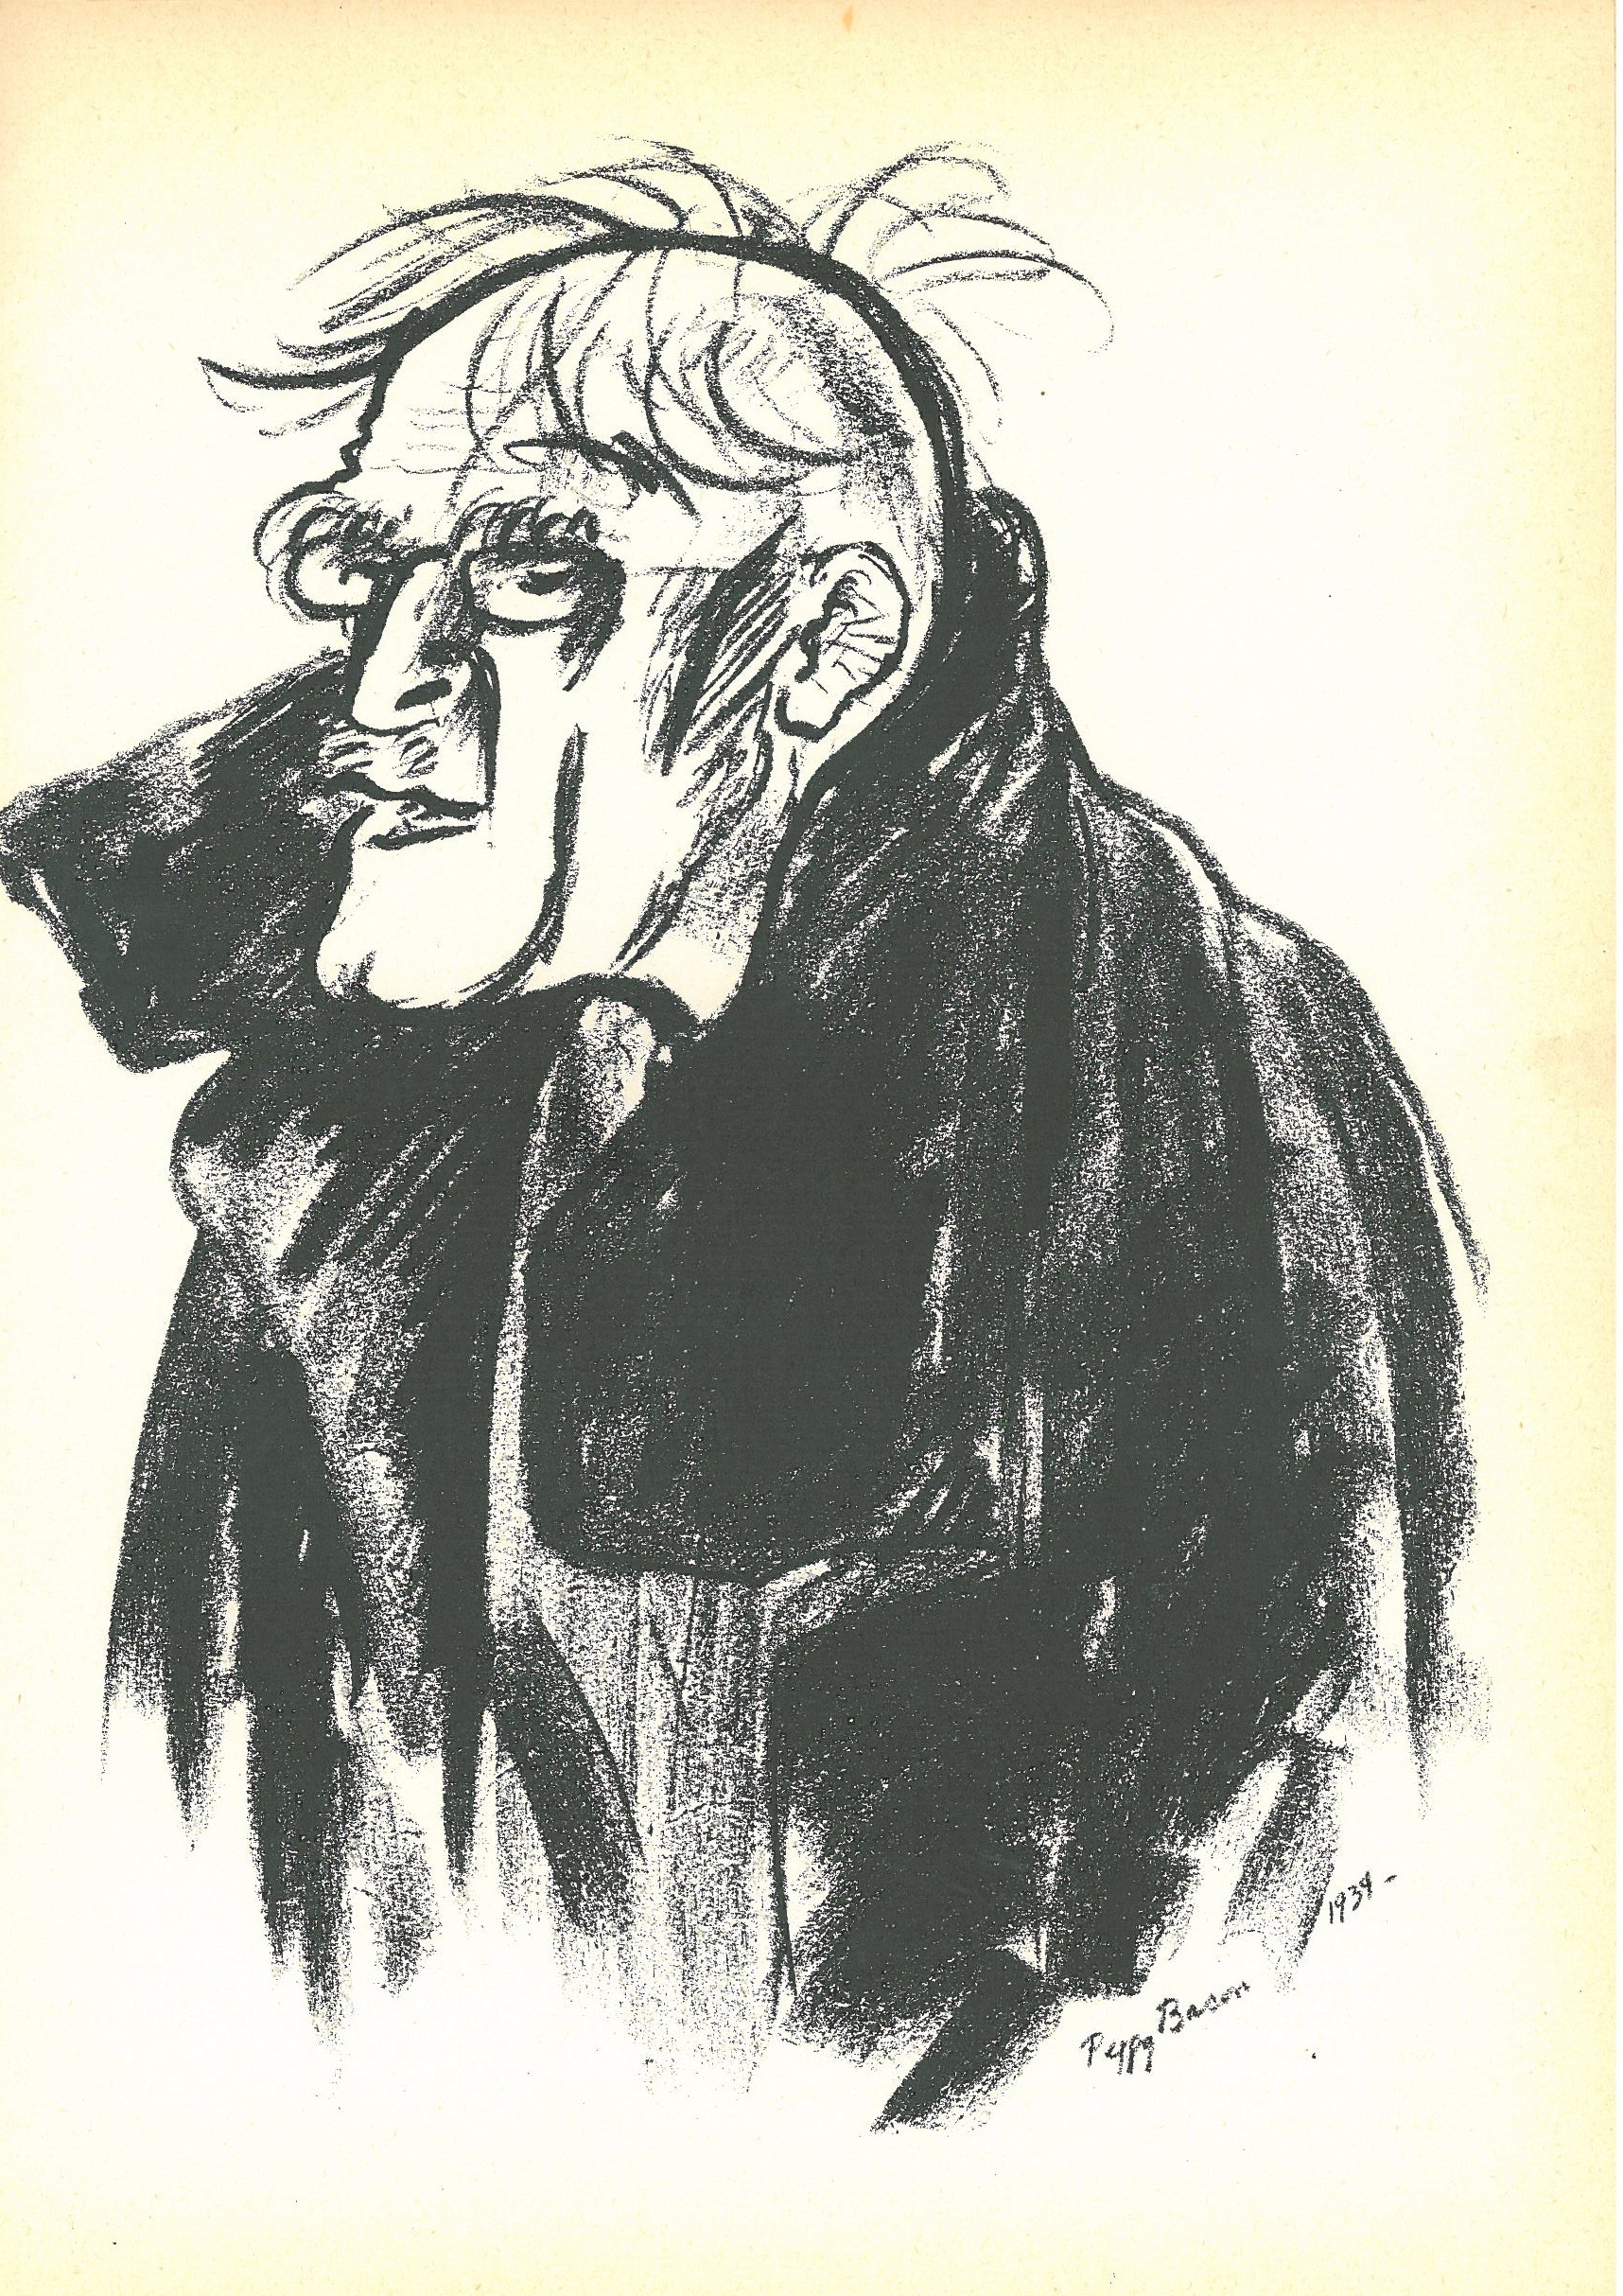 From Peggy Bacon's book of caricatures, 1934, her drawing of photographer and gallery founder Alfred Stieglitz